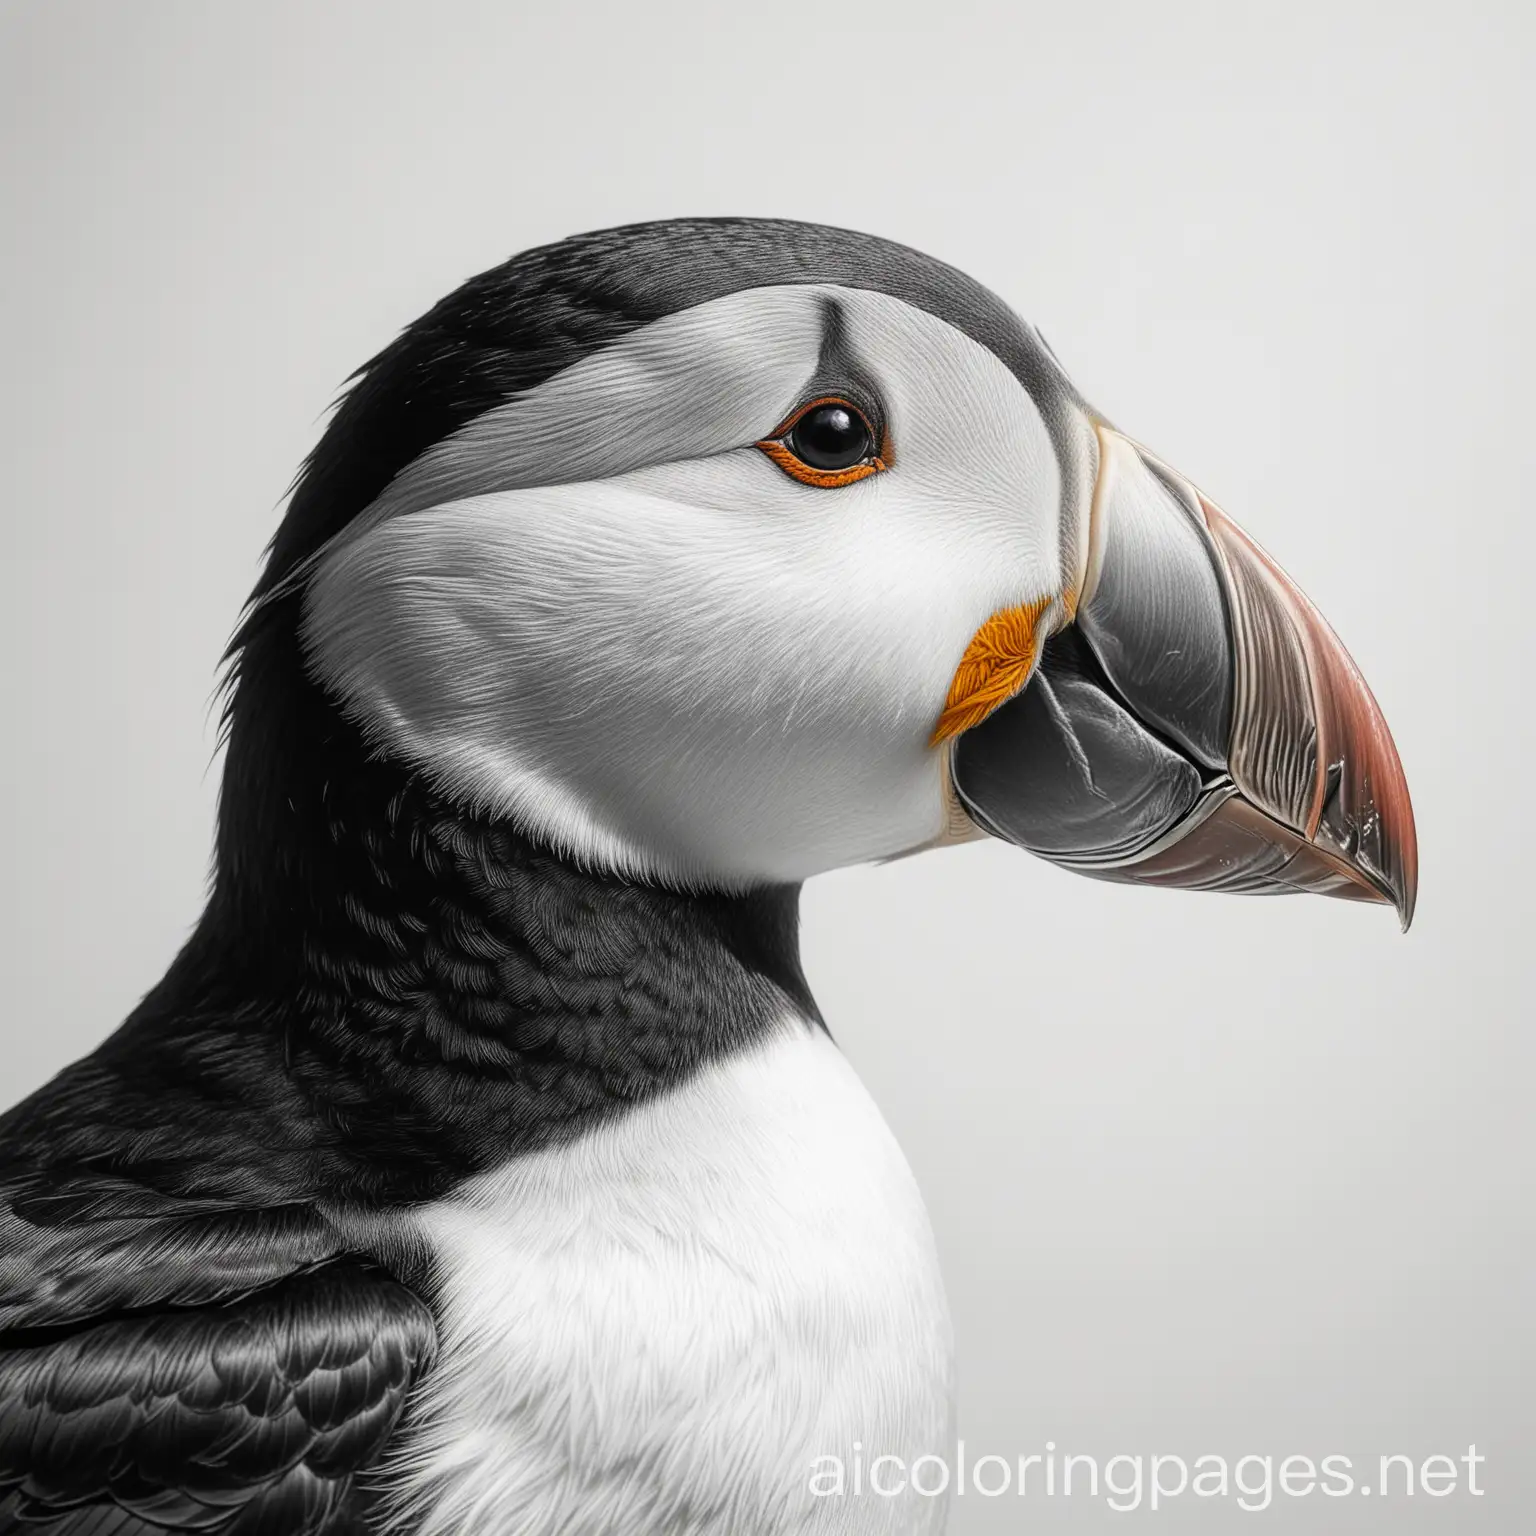 a puffin face profile mirrored, Coloring Page, black and white, line art, white background, Simplicity, Ample White Space. The background of the coloring page is plain white to make it easy for young children to color within the lines. The outlines of all the subjects are easy to distinguish, making it simple for kids to color without too much difficulty